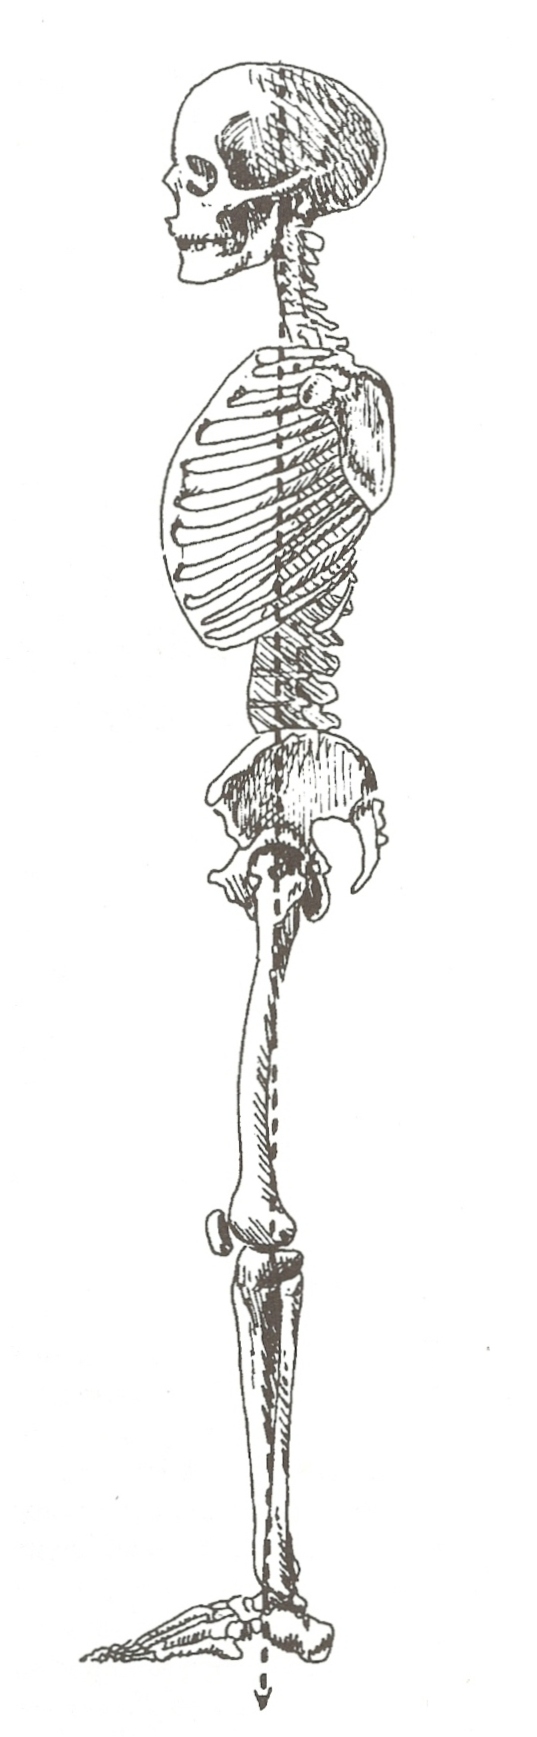 The skeleton is standing with the weight transferred down through the front part of the spine